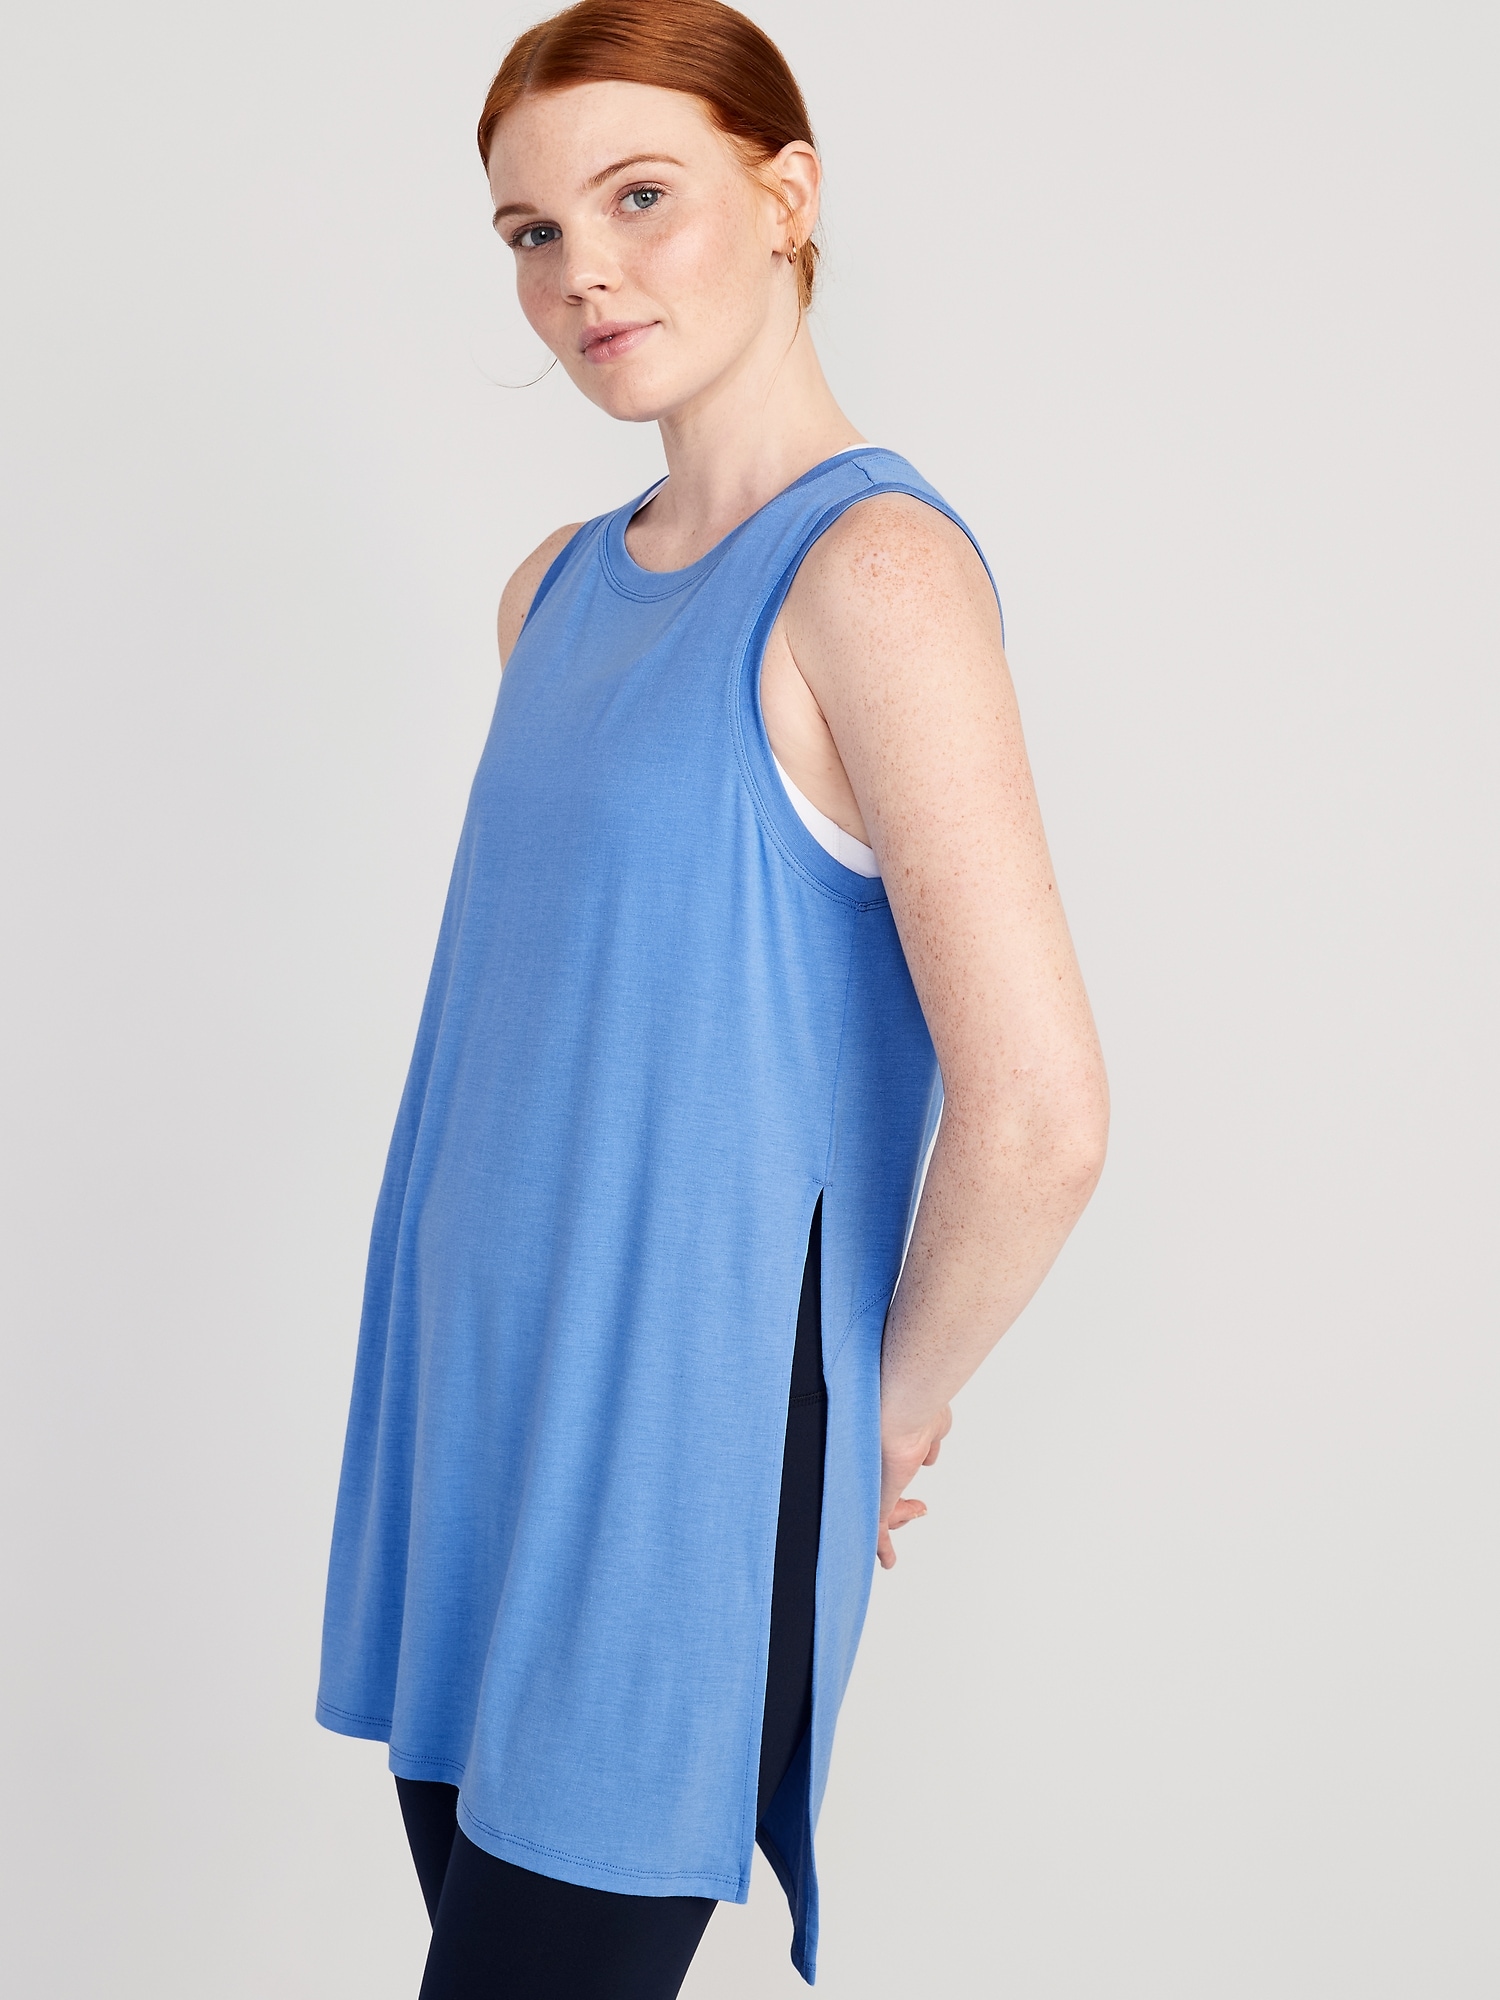 UltraLite All-Day Tunic | Old Navy